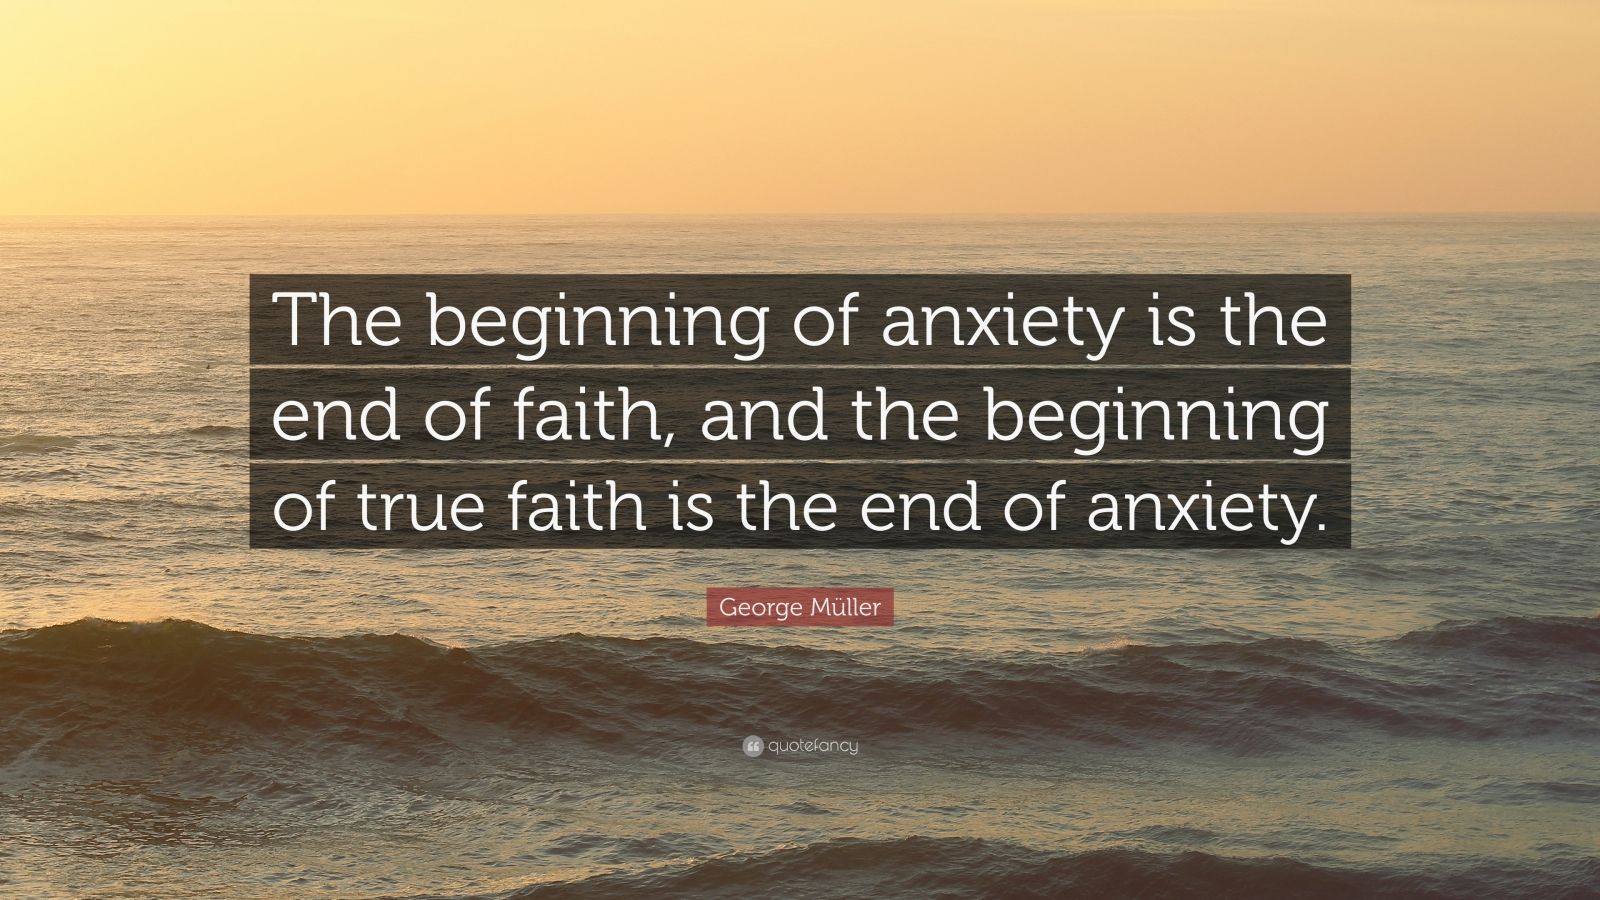 George Müller Quote: “The beginning of anxiety is the end of faith, and